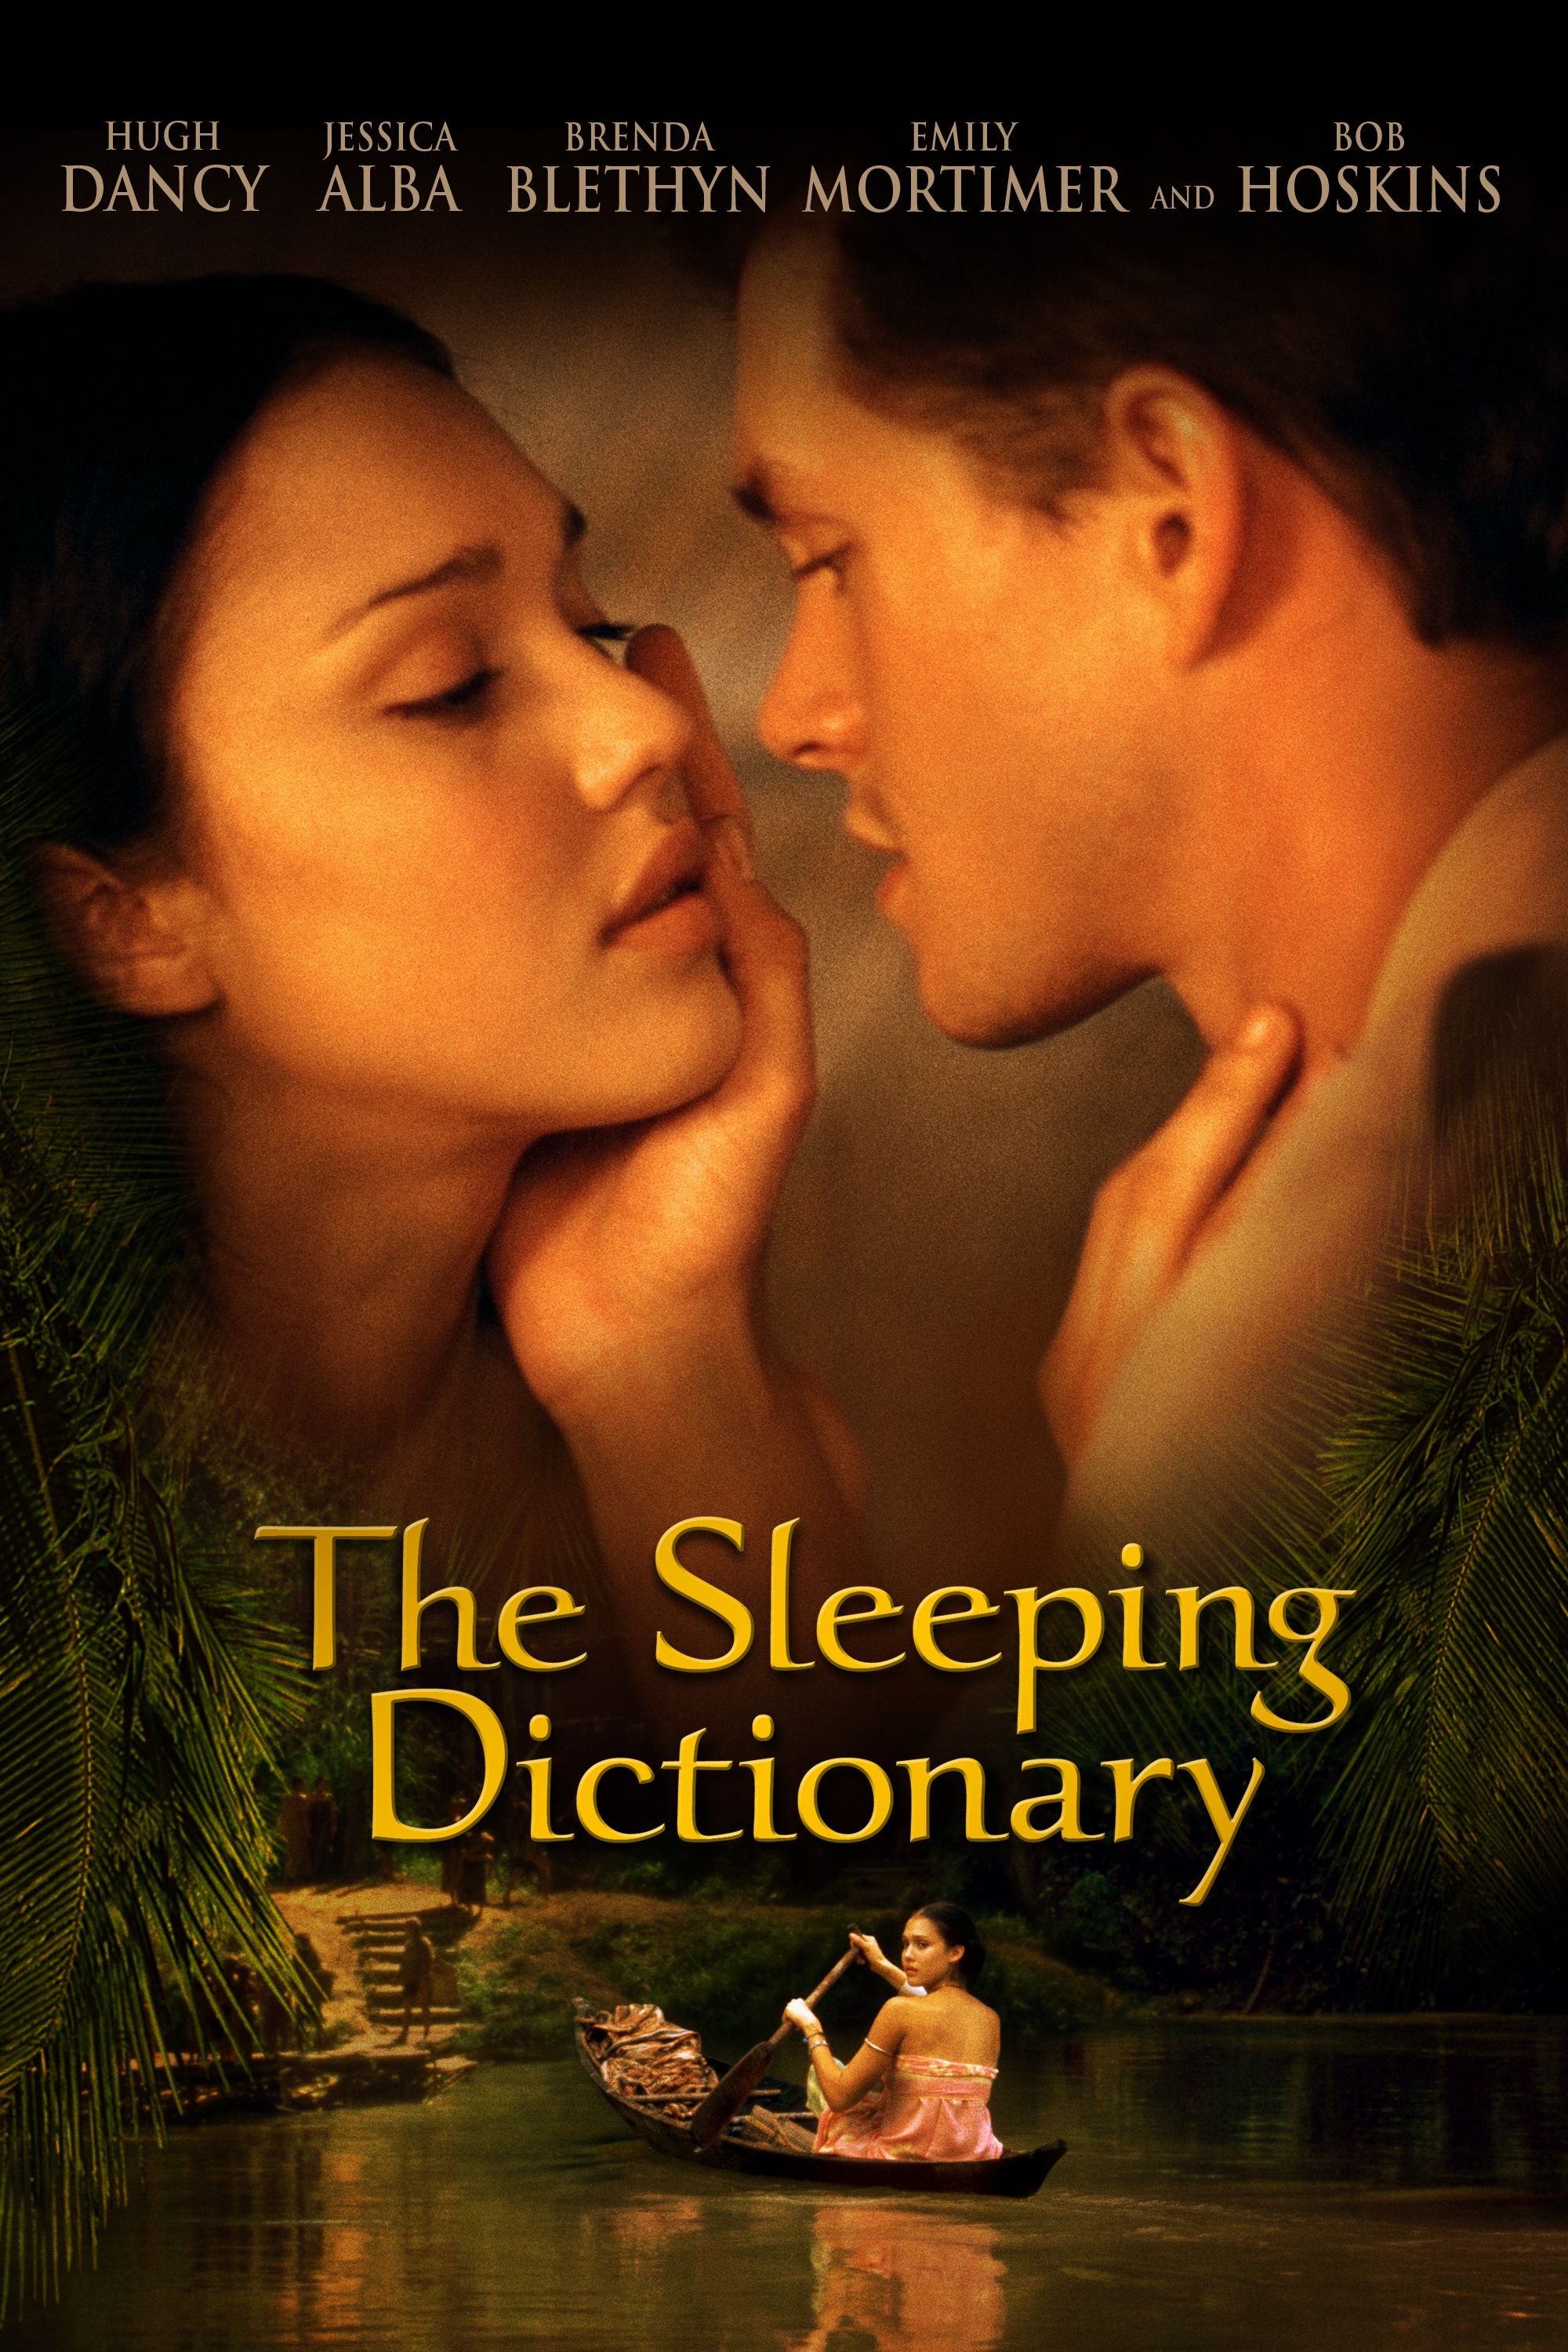 The sleeping dictionary movie online